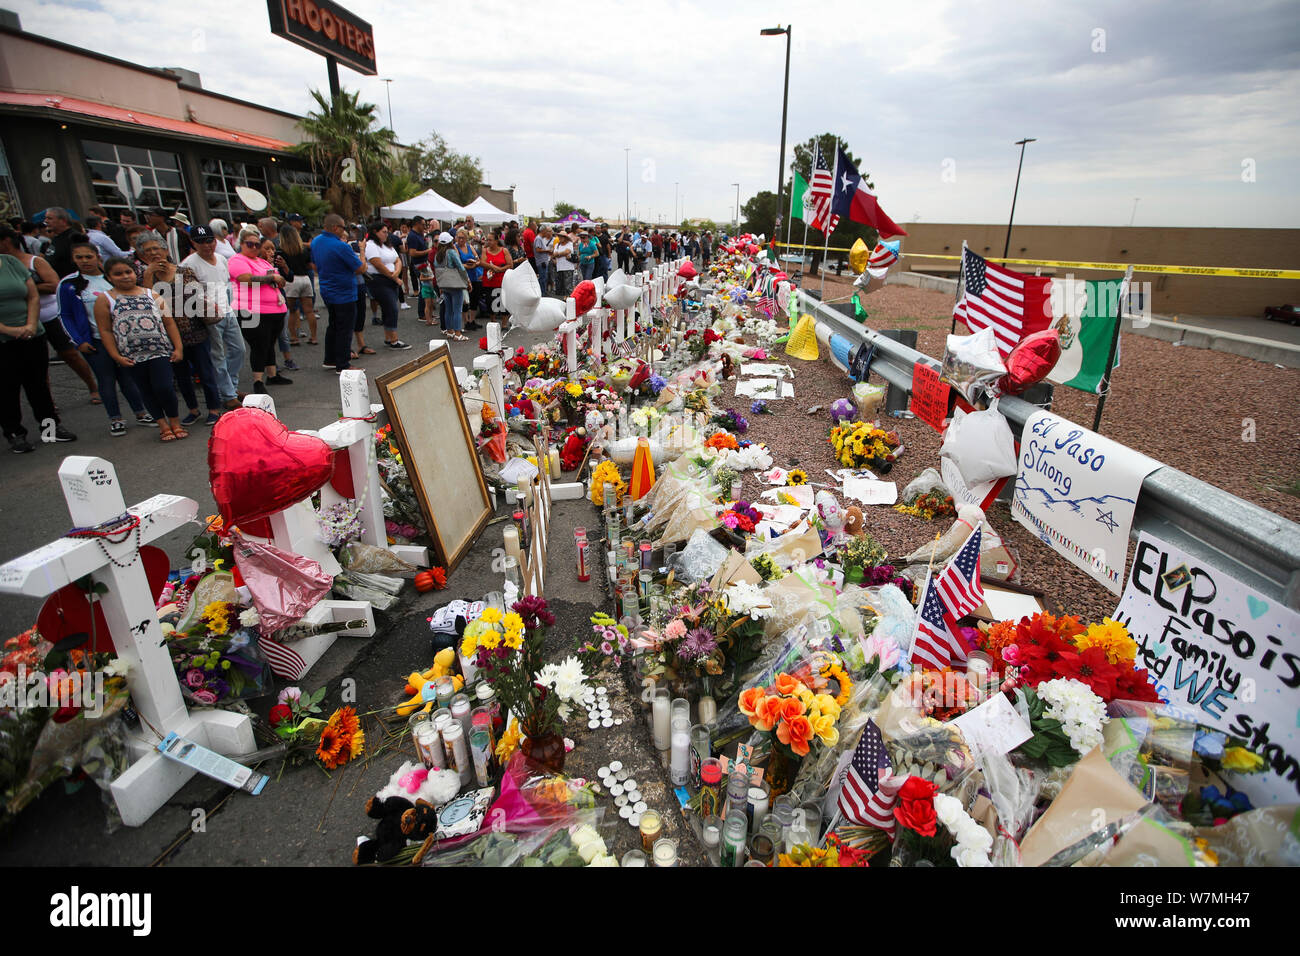 El Paso, USA. 6th Aug, 2019. People mourn for victims near the Walmart center where Saturday's massive shooting took place, in El Paso, Texas, the United States, Aug. 6, 2019. Credit: Wang Ying/Xinhua/Alamy Live News Stock Photo